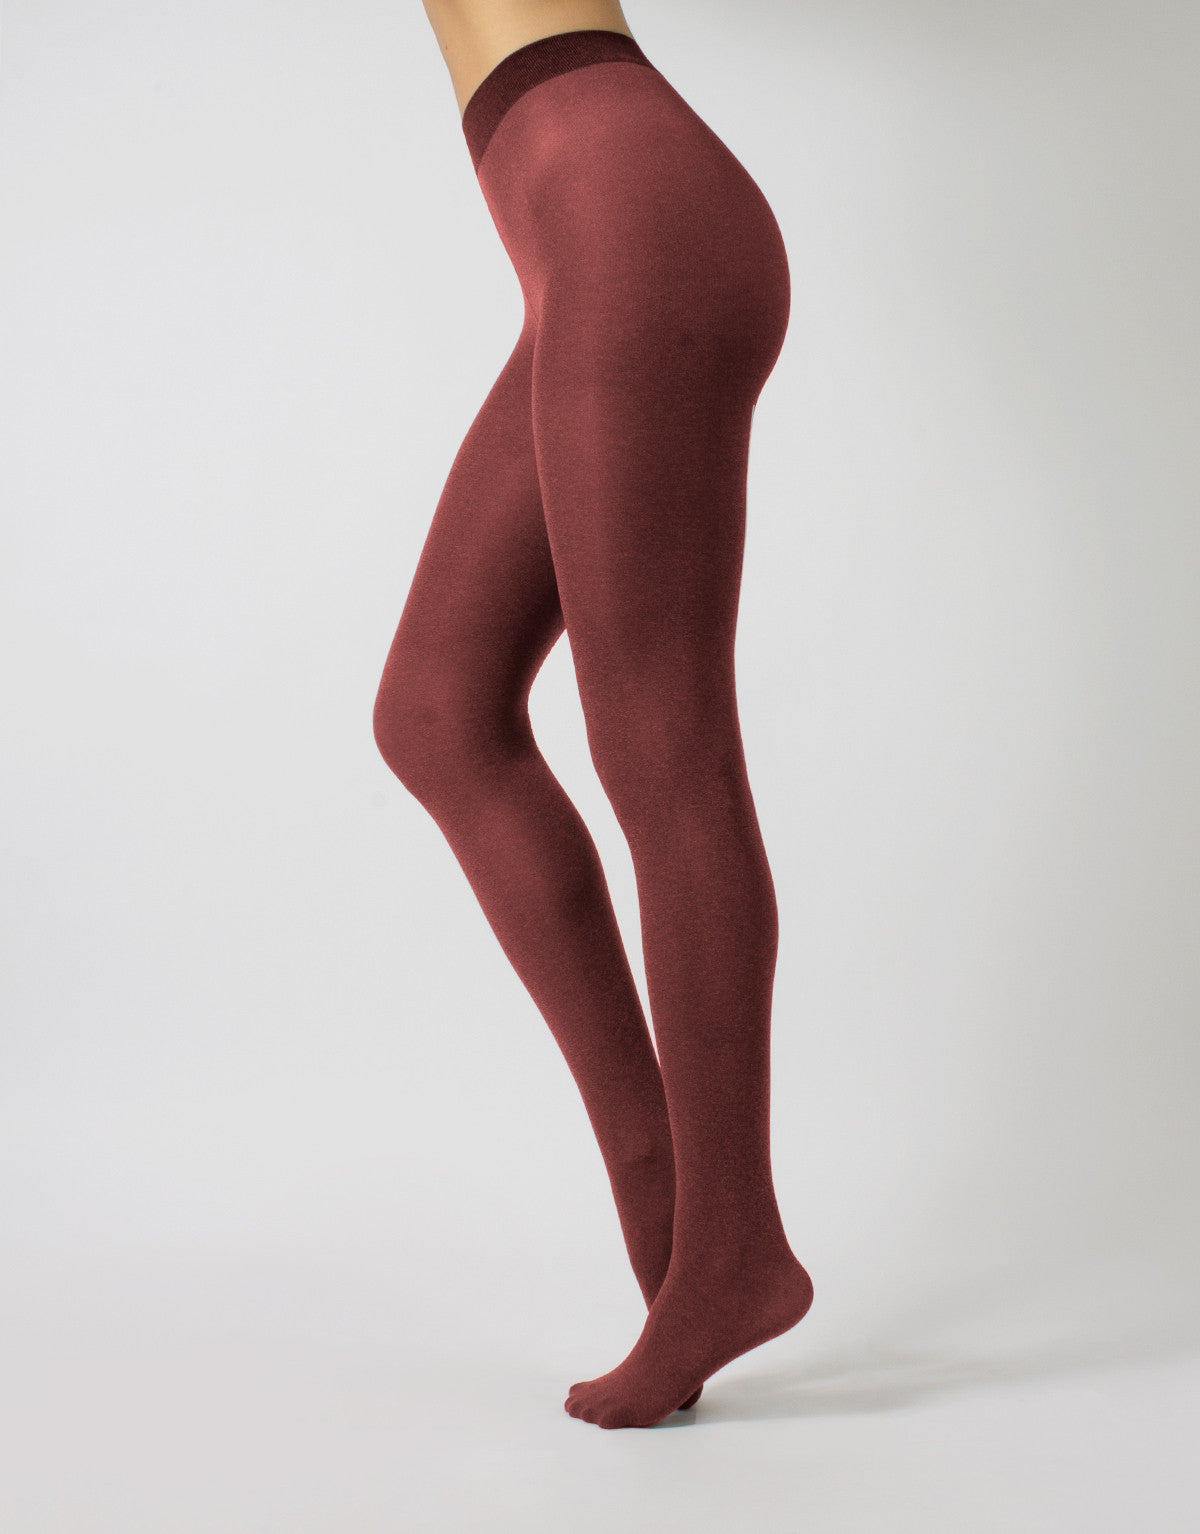 Calzitaly Melange Seam Tights - Wine burgundy opaque fashion tights with a knitted fleck effect, white back seam.